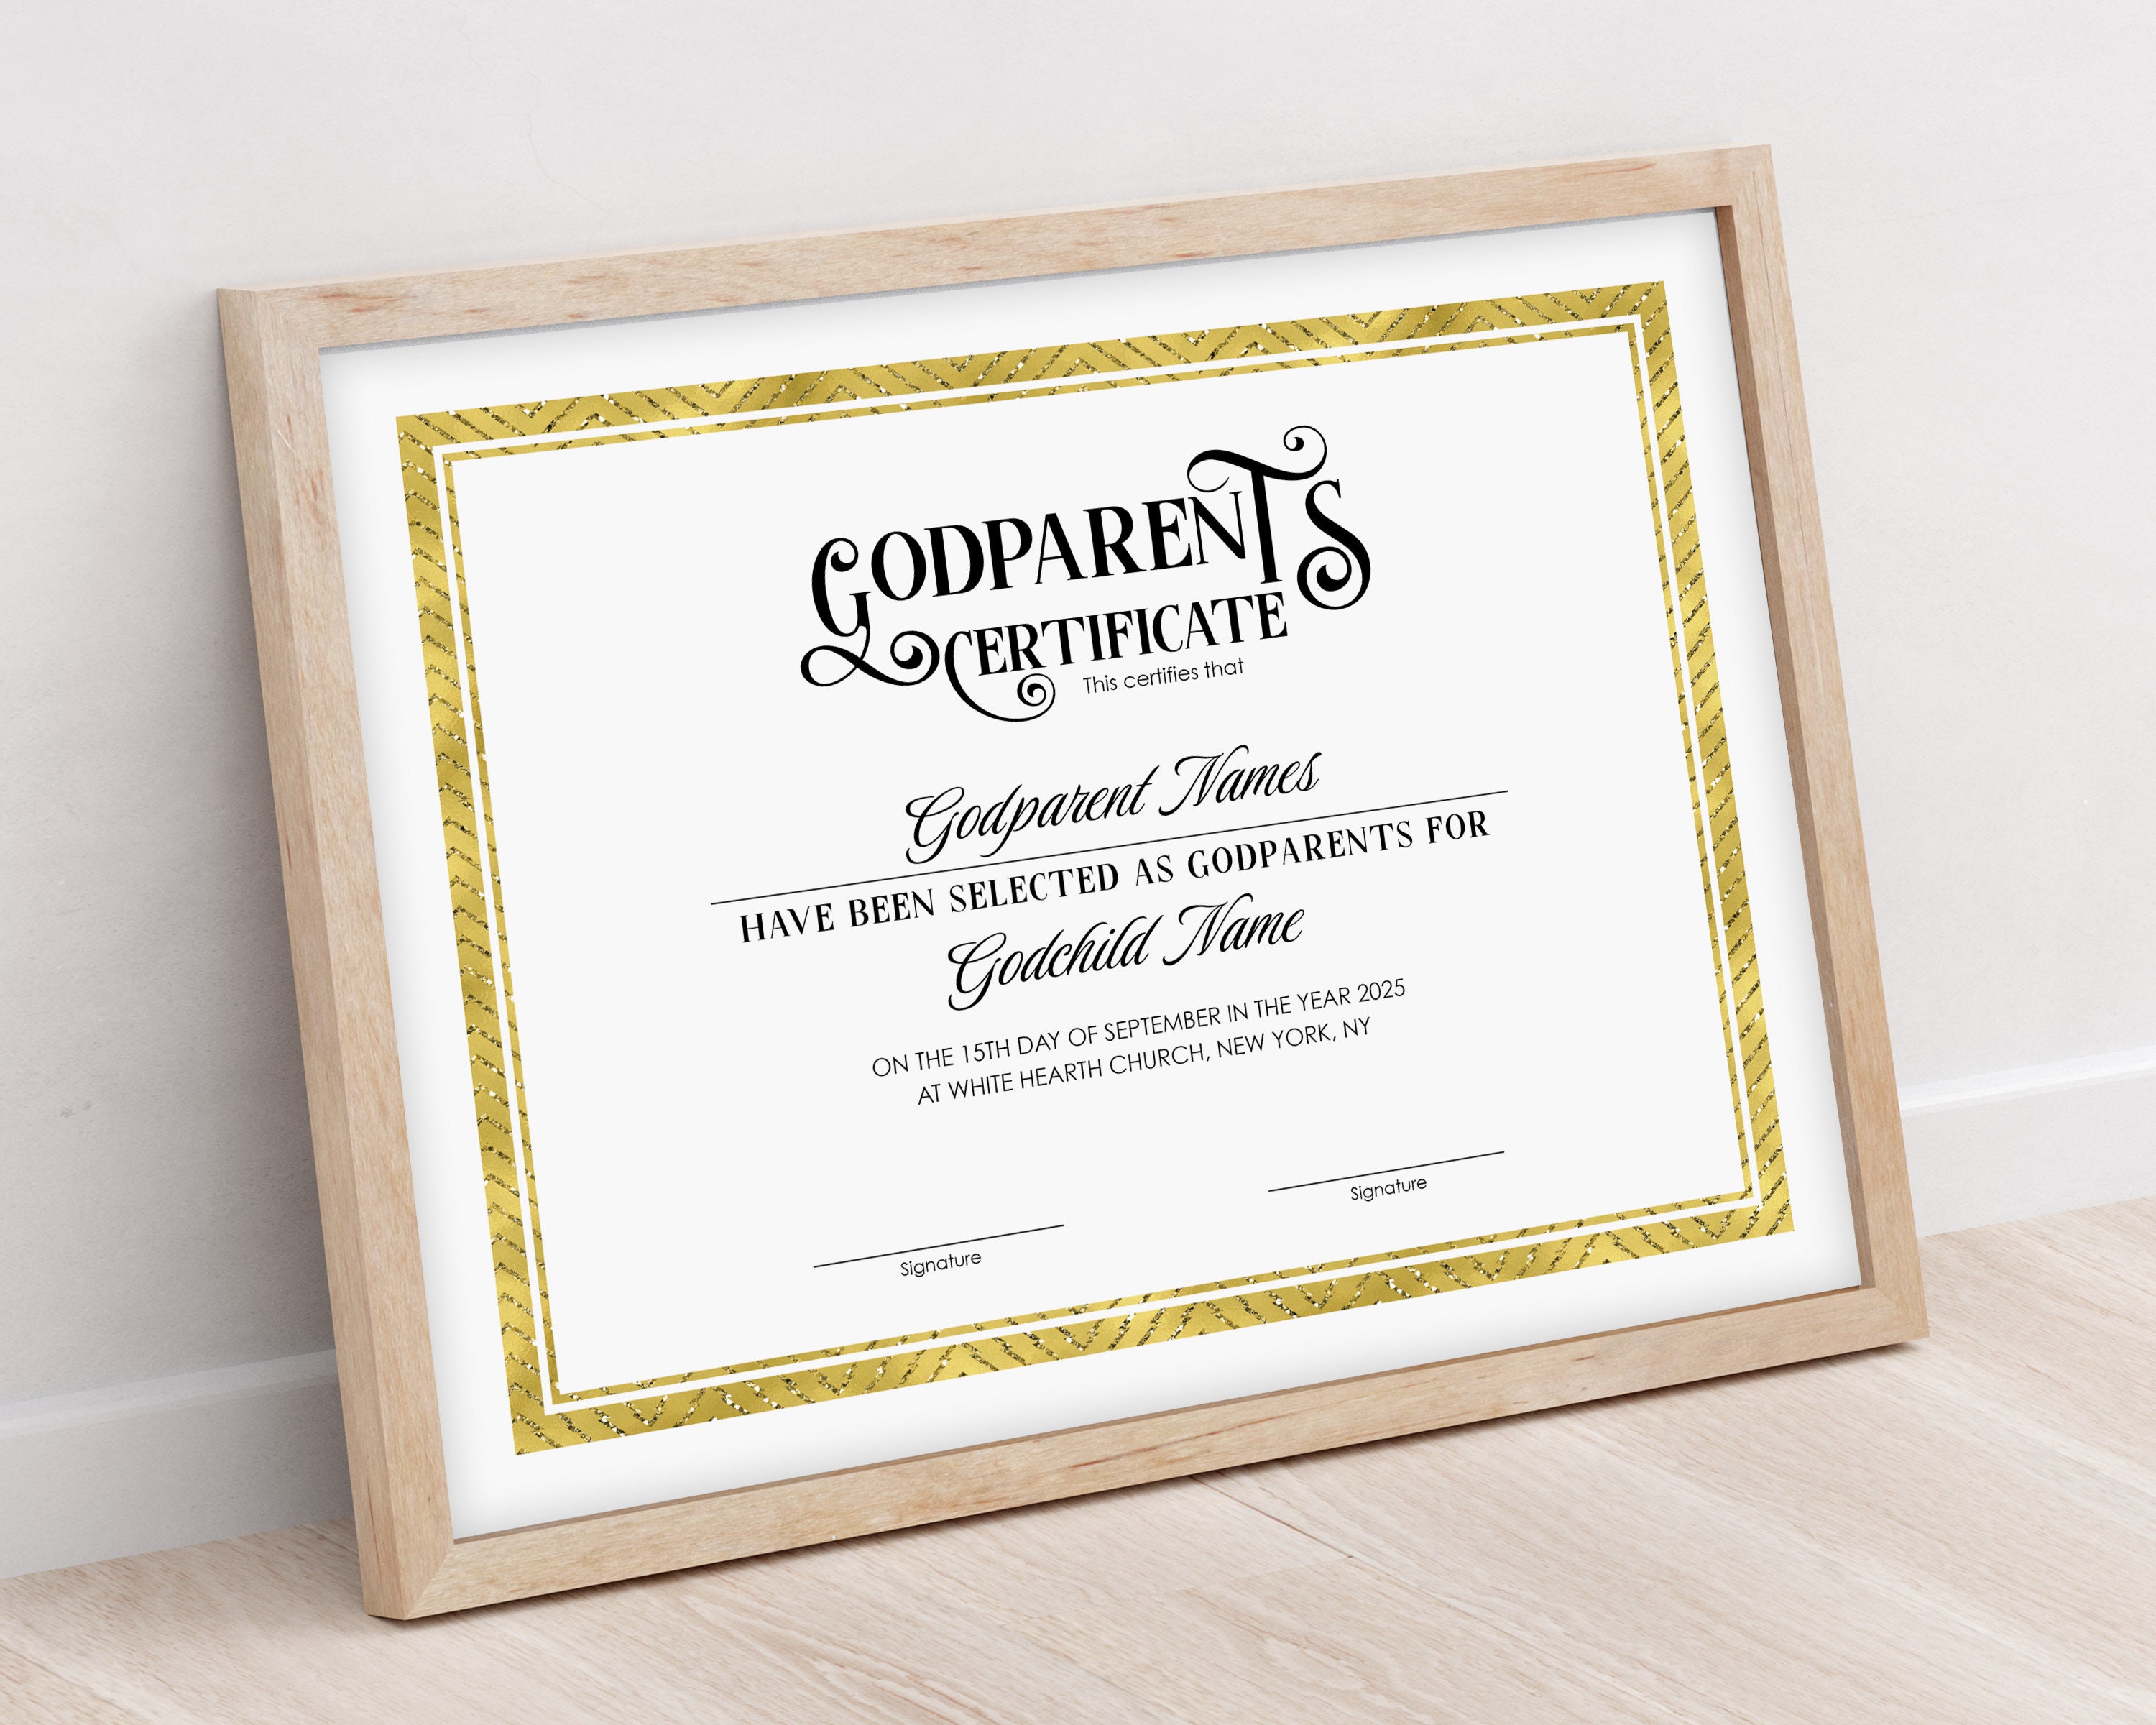 How To Get A Godparent Certificate